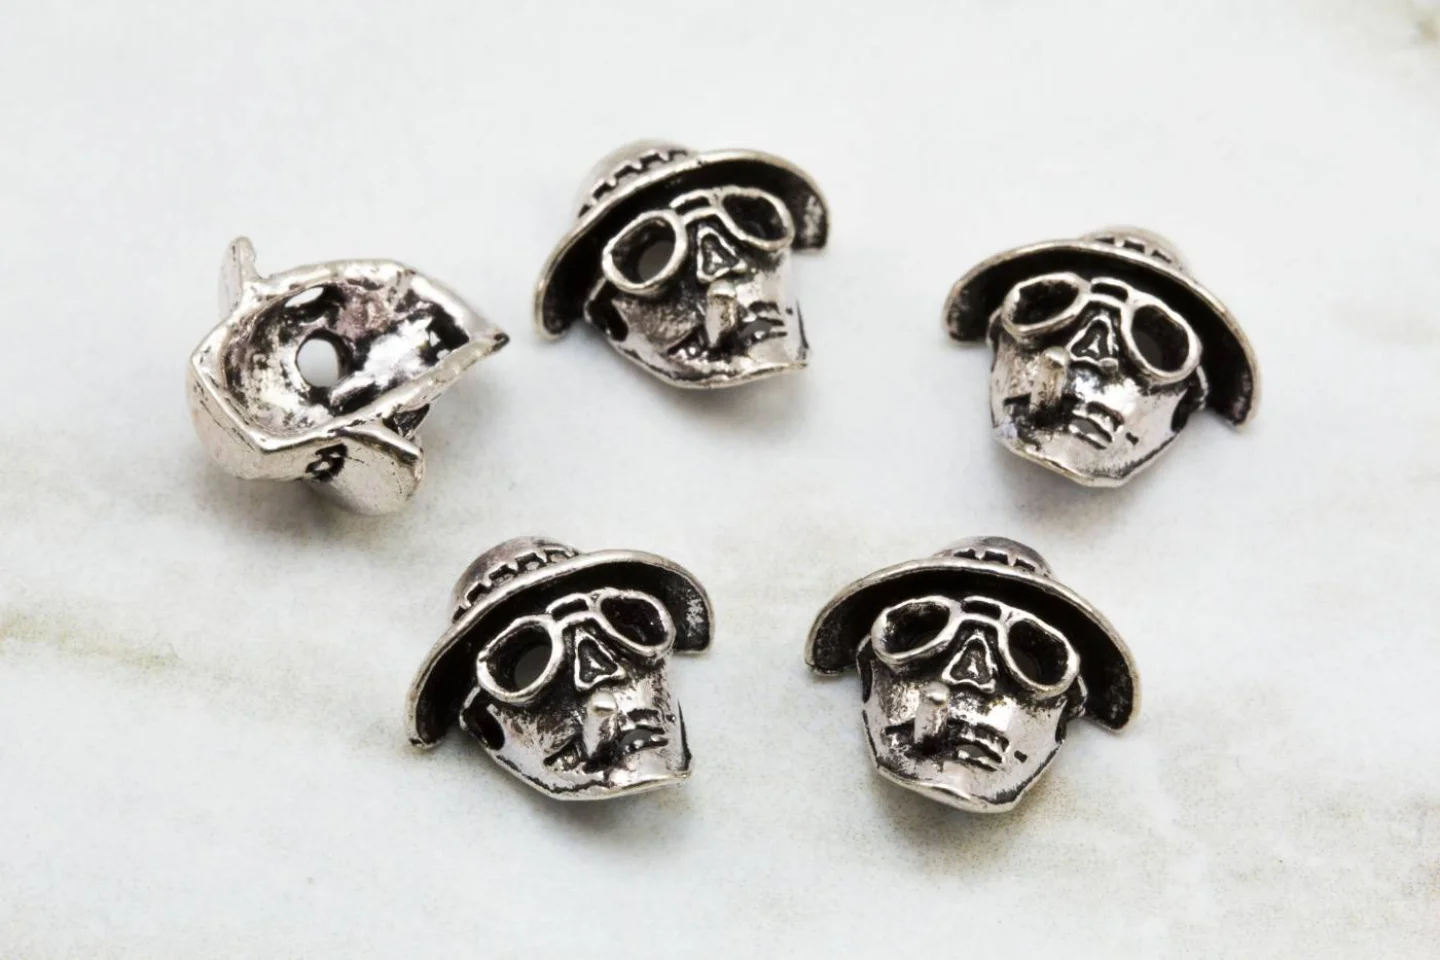 jewelry-pirate-metal-charm-findings.